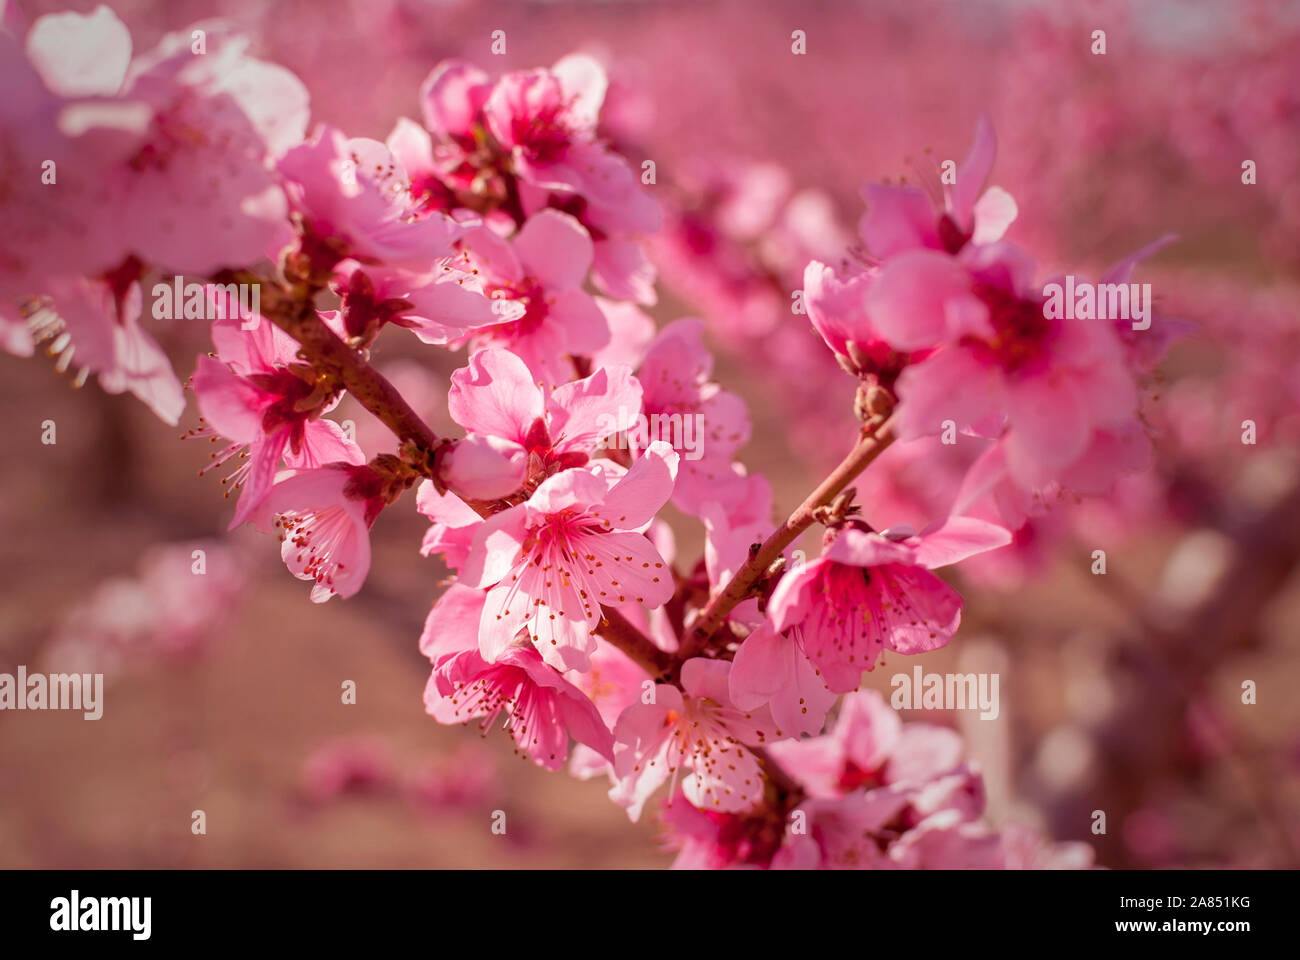 View of pink peach trees in bloom. White and pink delicate flowers. Pink and fresh tones on a natural background. Torres de Segre and Alcarras landsca Stock Photo